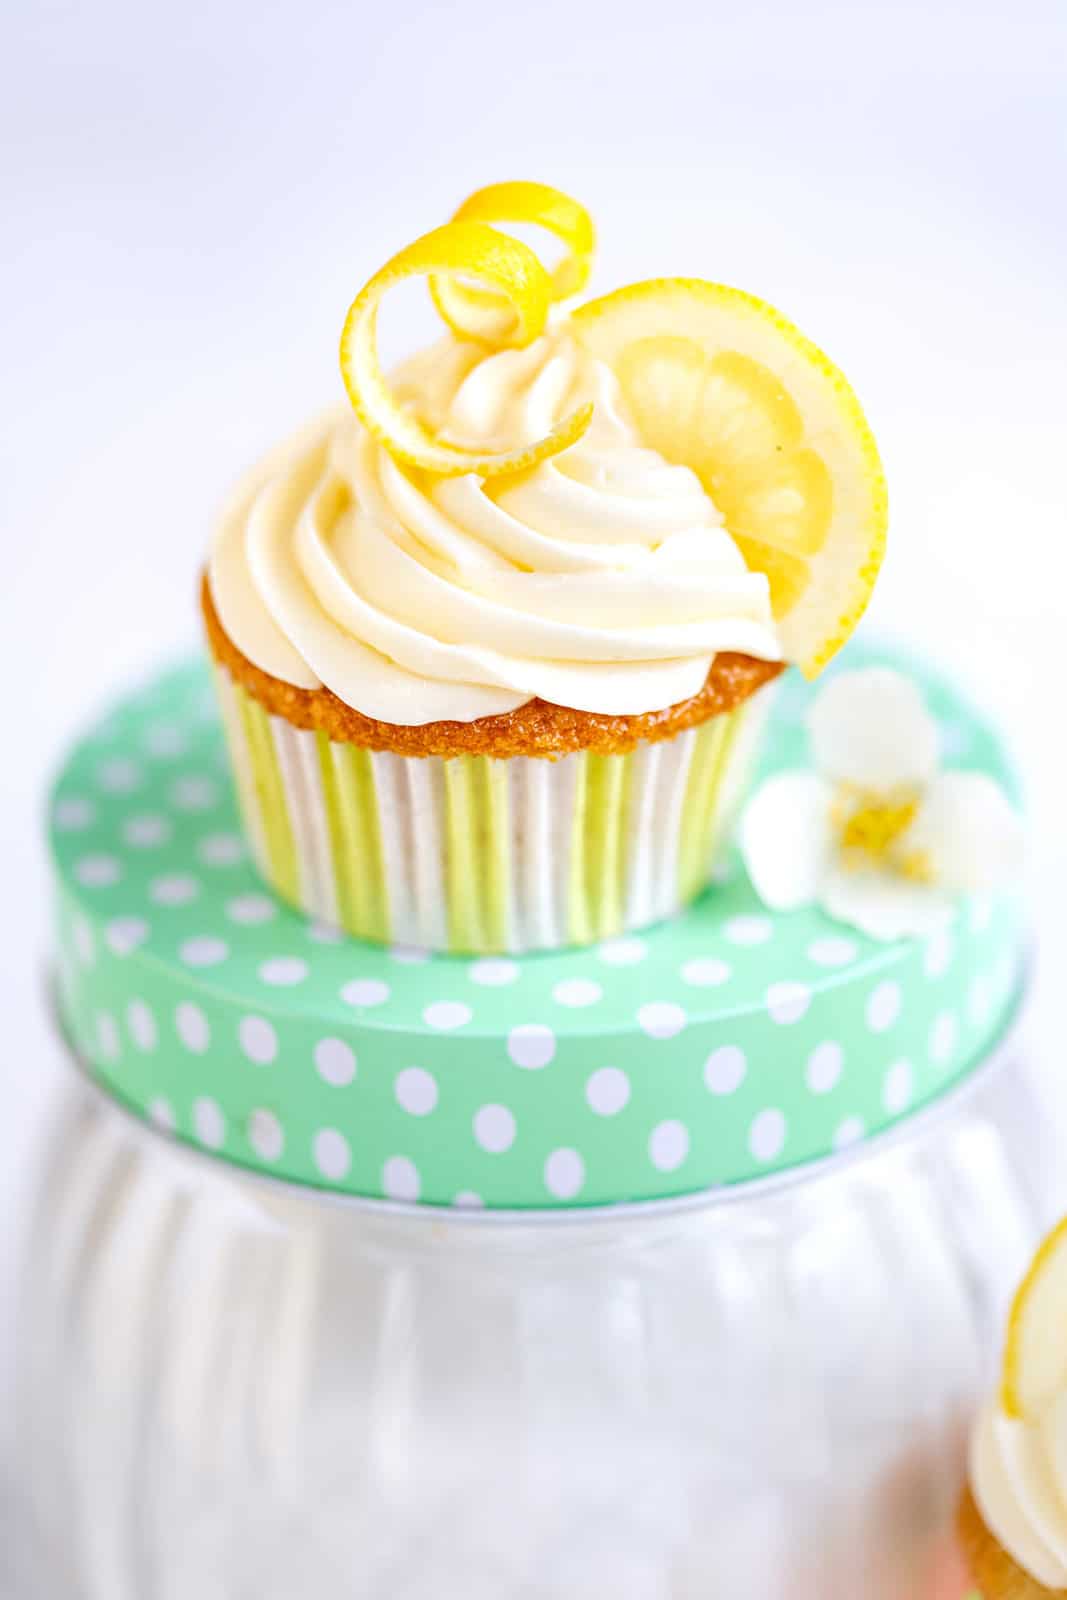 Lemon Cupcake with cream cheese frosting garnished with a twist of lemon peel and lemon slice